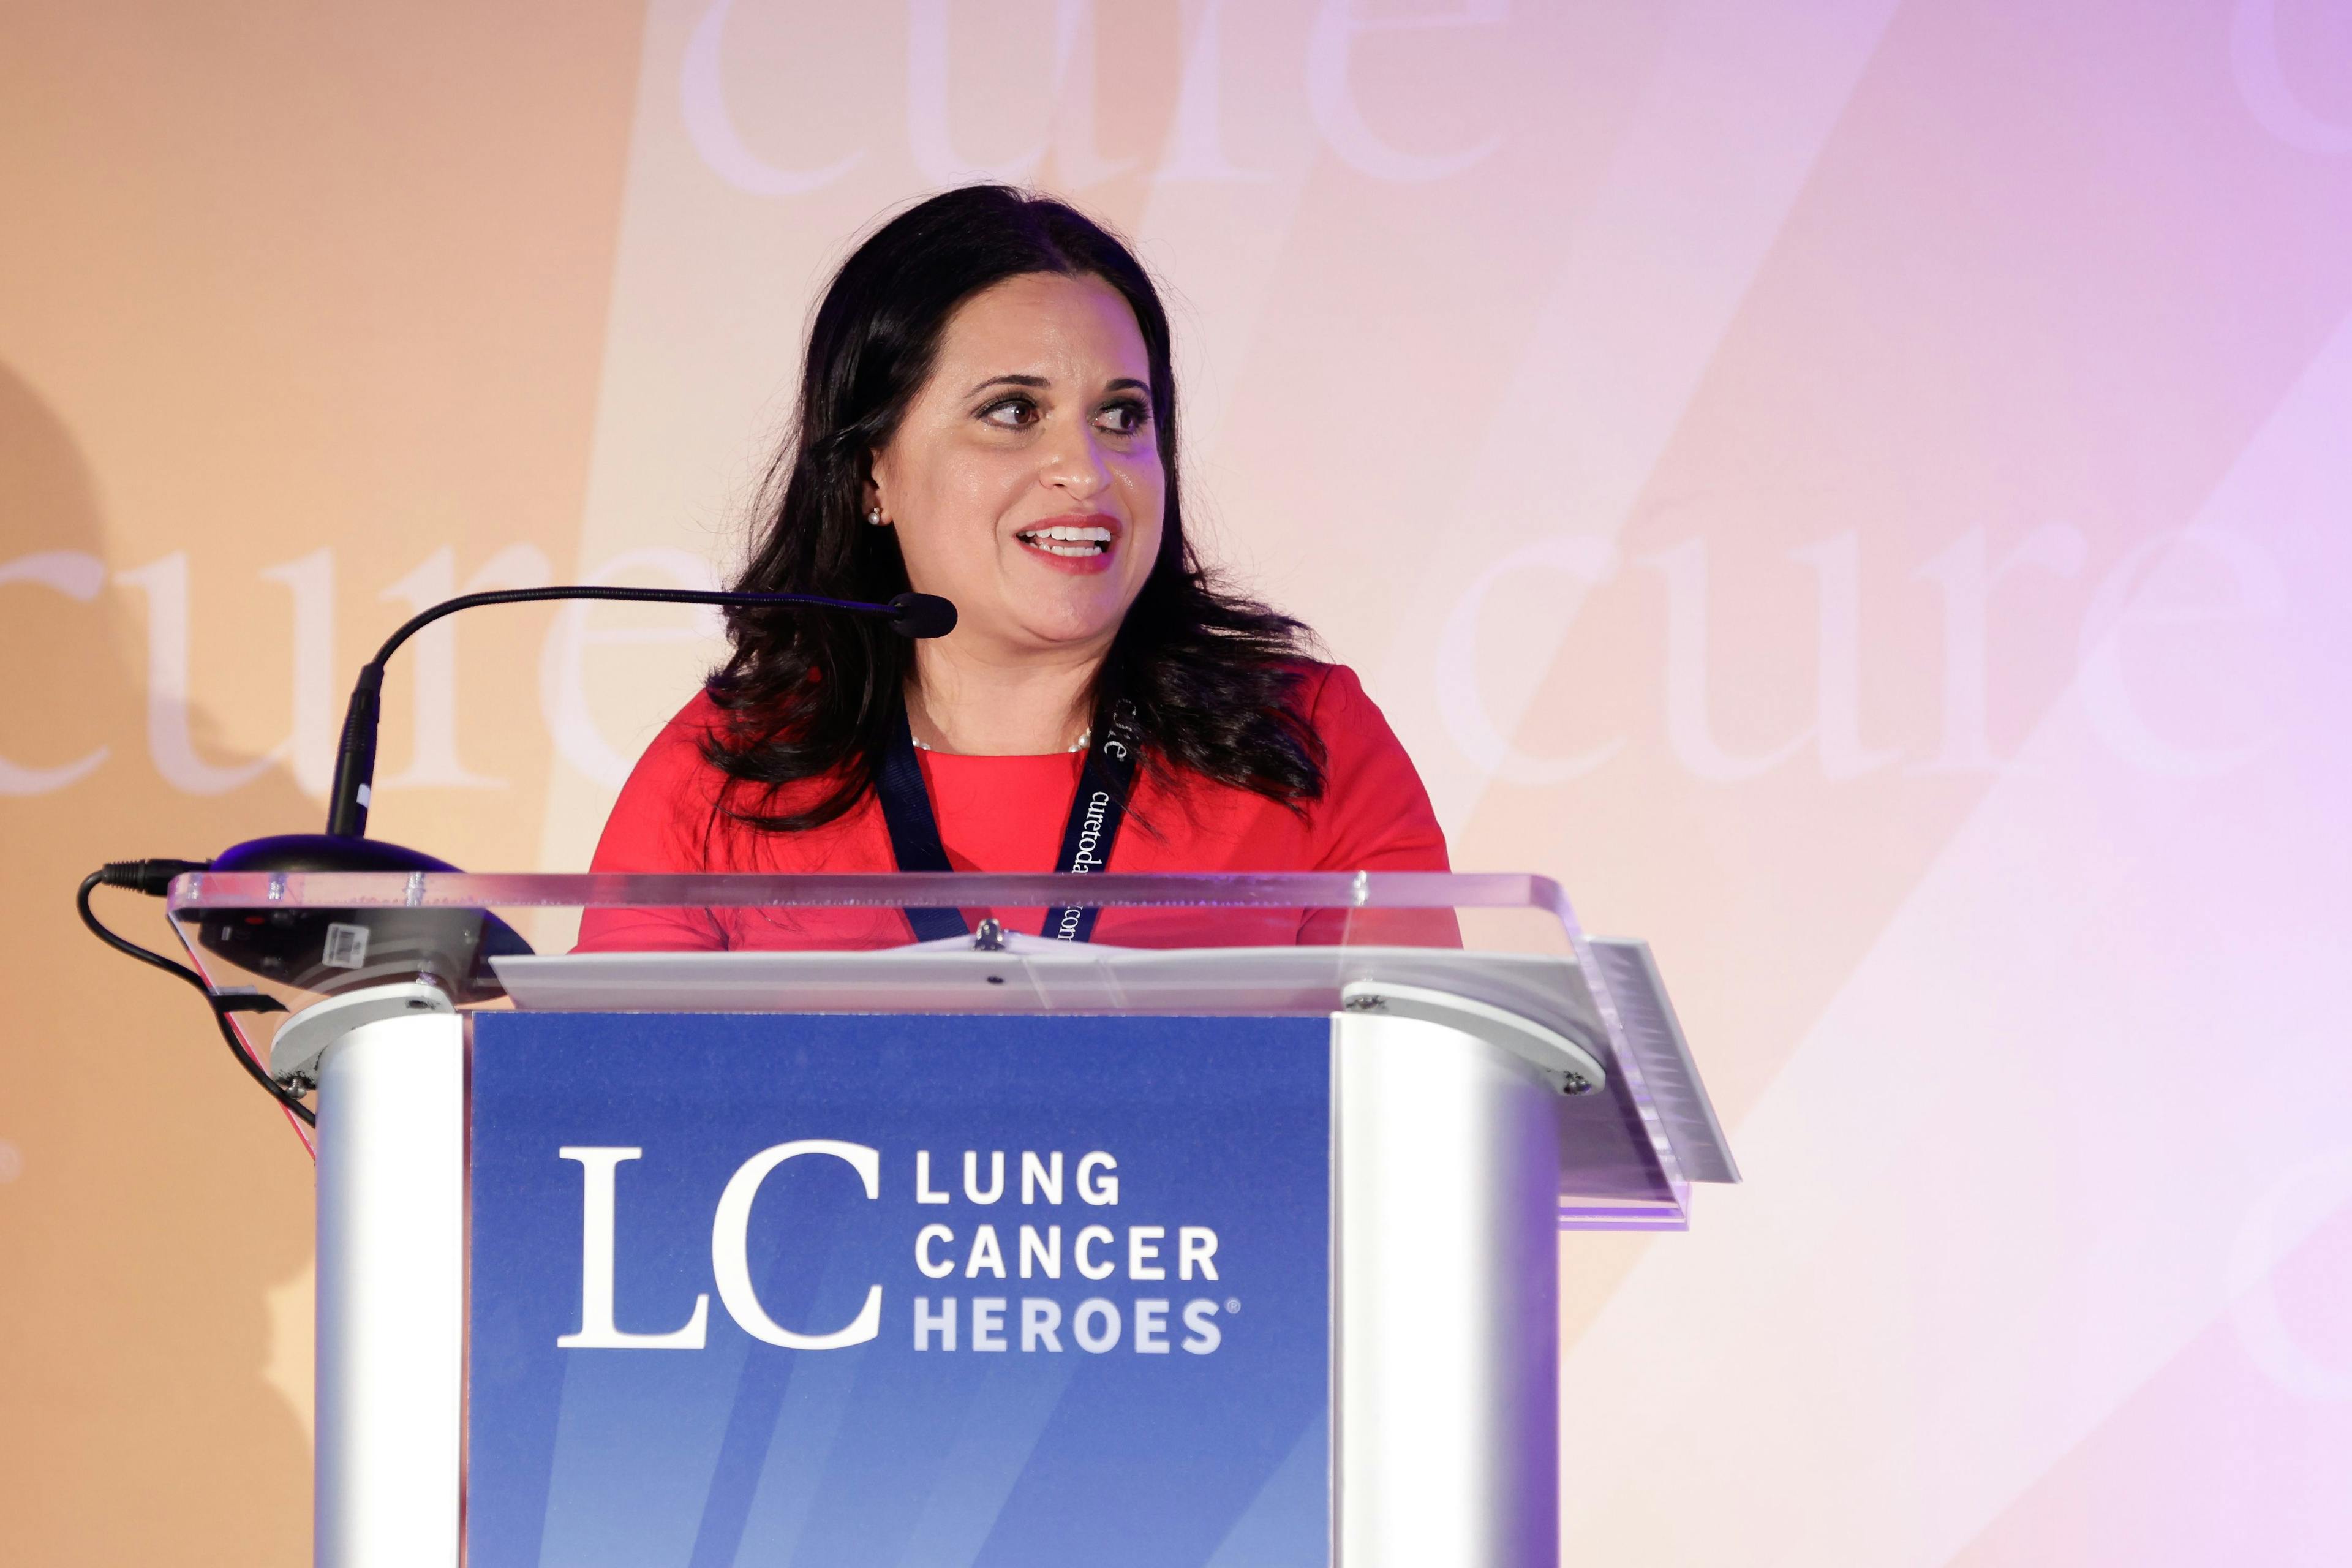 A Lung Cancer Hero Is the Doctor ‘Every Oncologist Should Strive to Be’